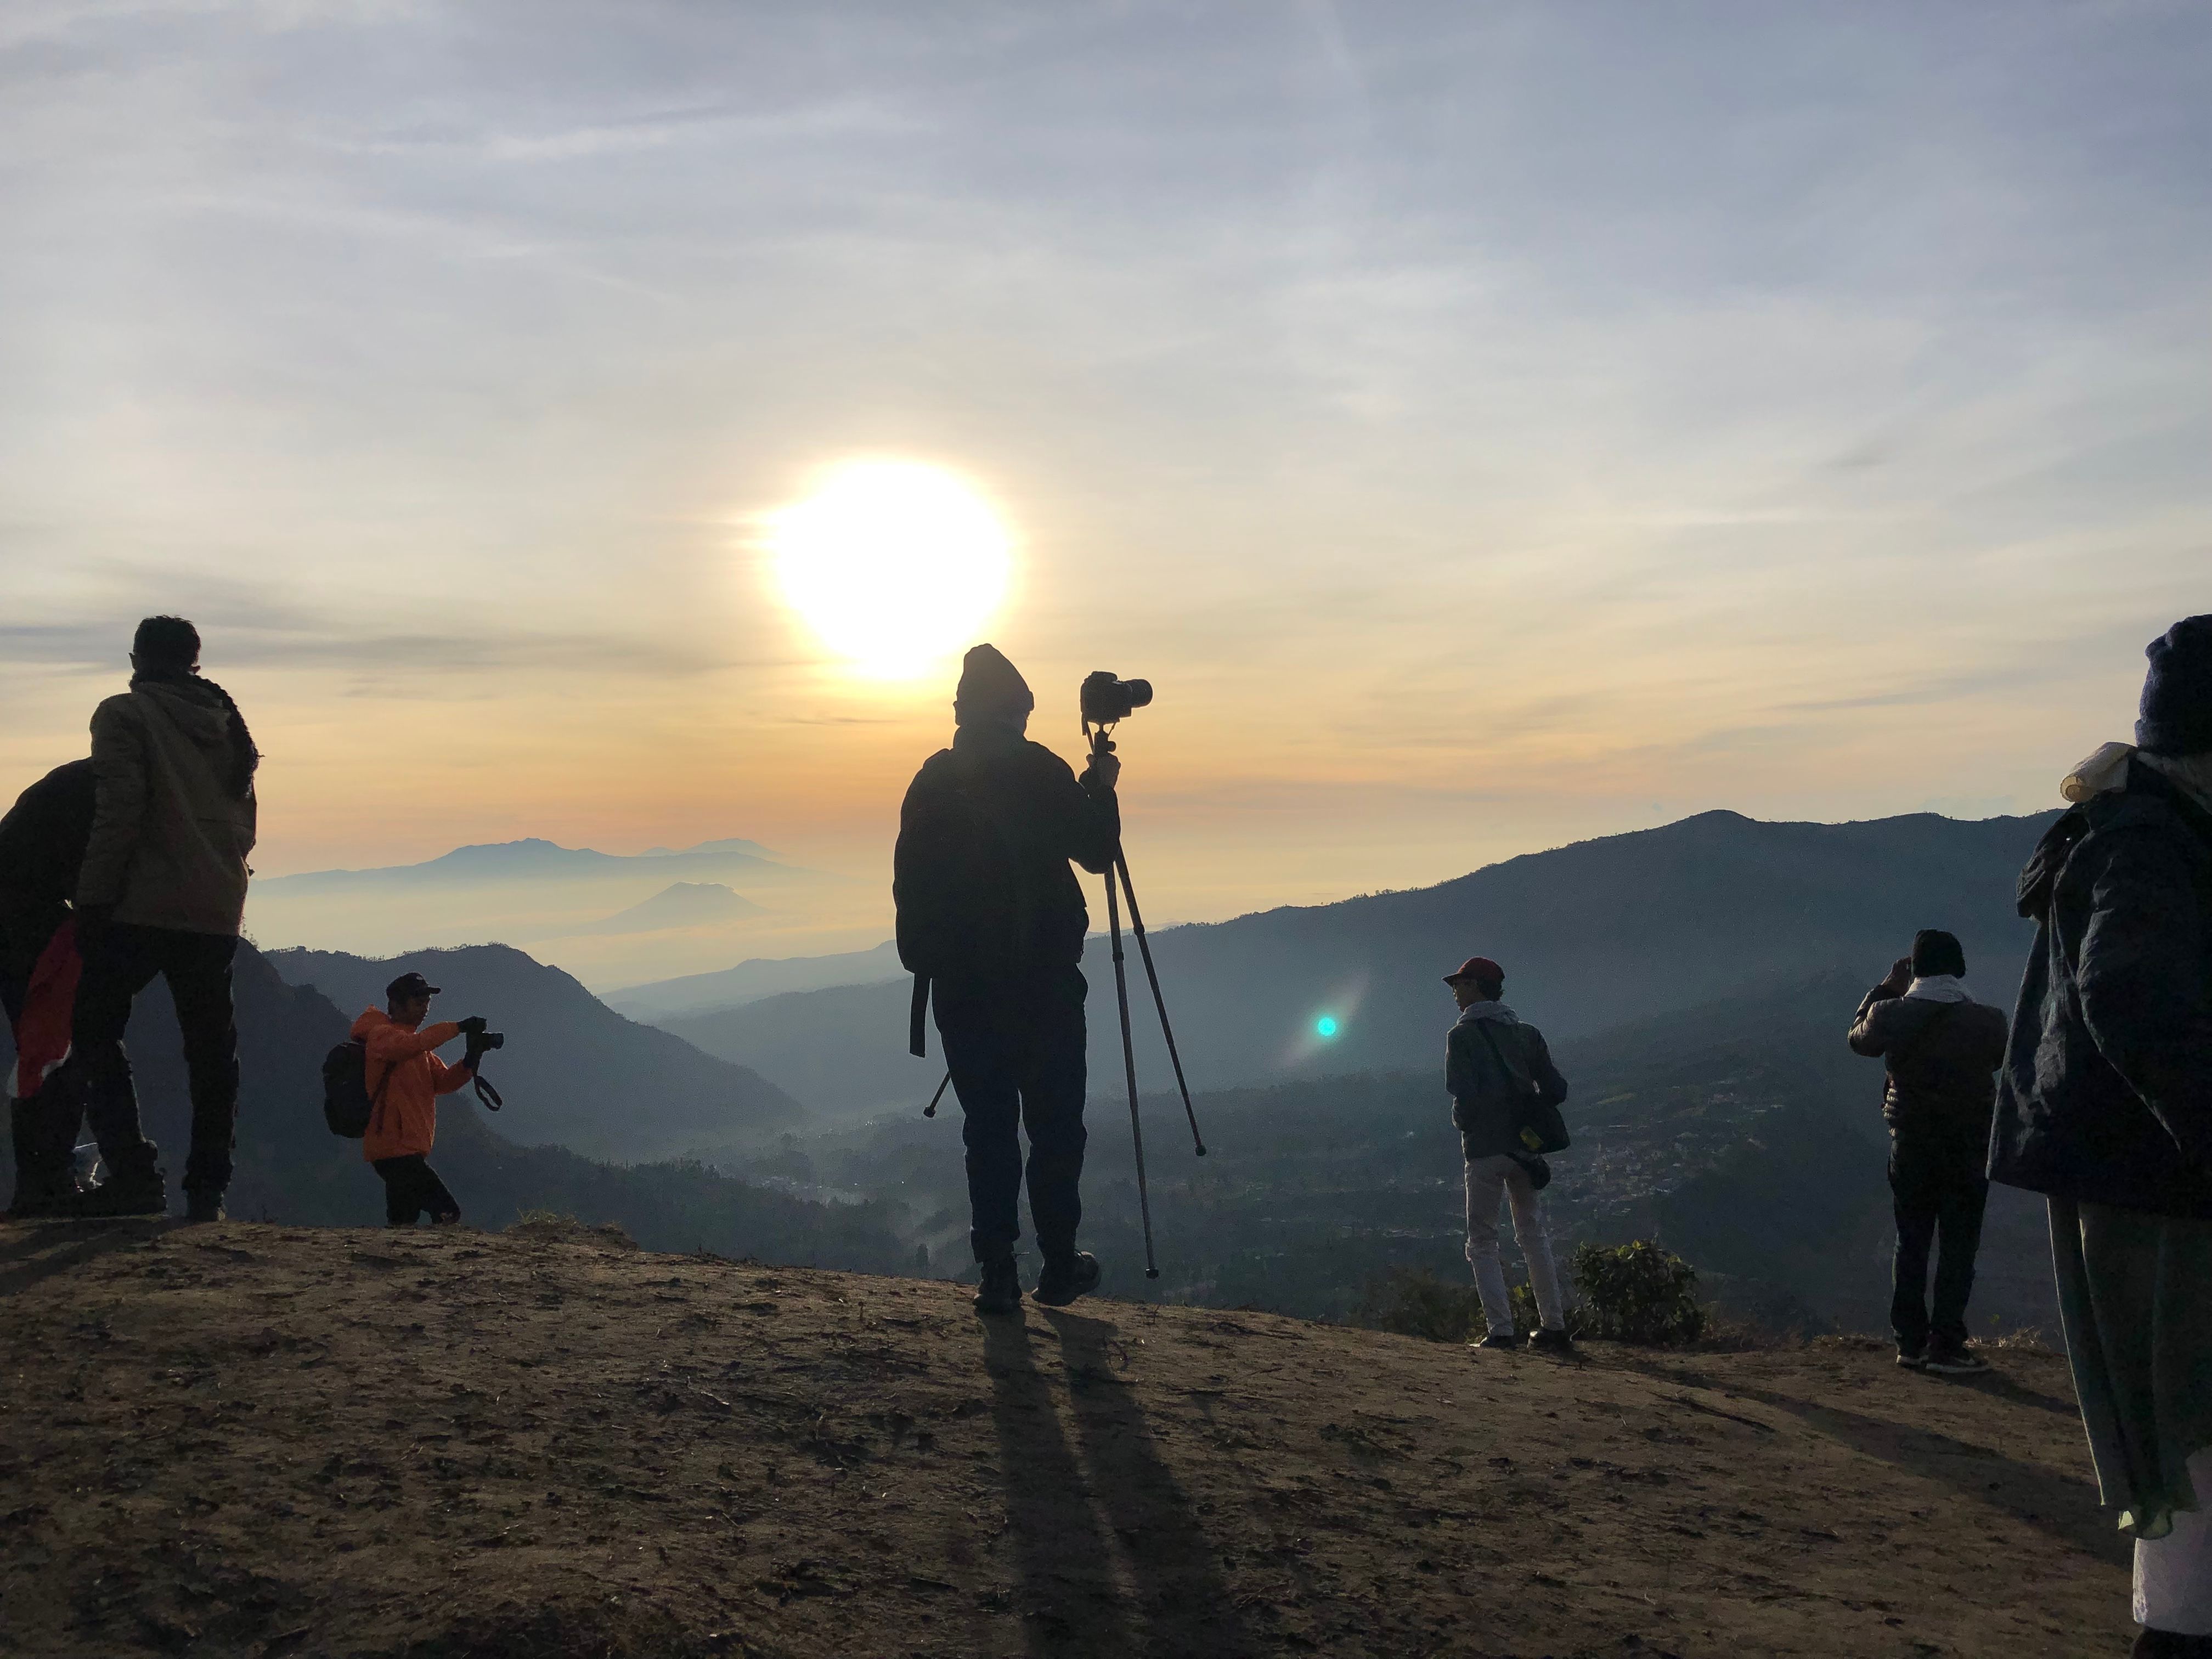 Watching the Sunrise from King Kong Hill. Cemoro Lawang, East Java.